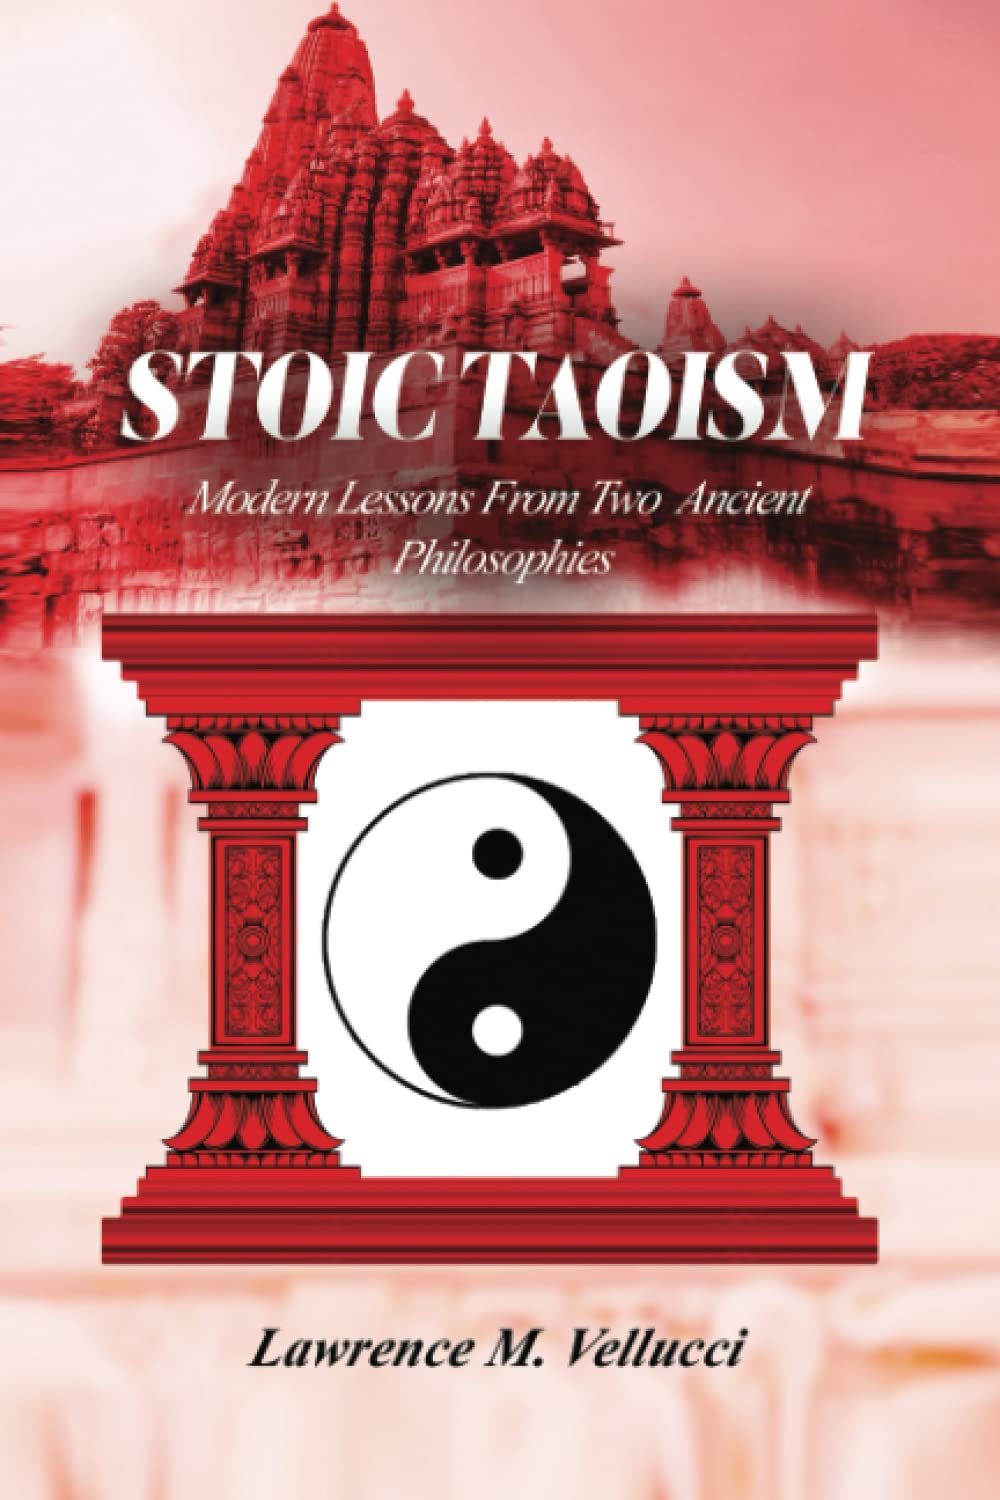 Modern Wisdom Meets Ancient Philosophy in "Stoic Taoism" by Lawrence M. Vellucci